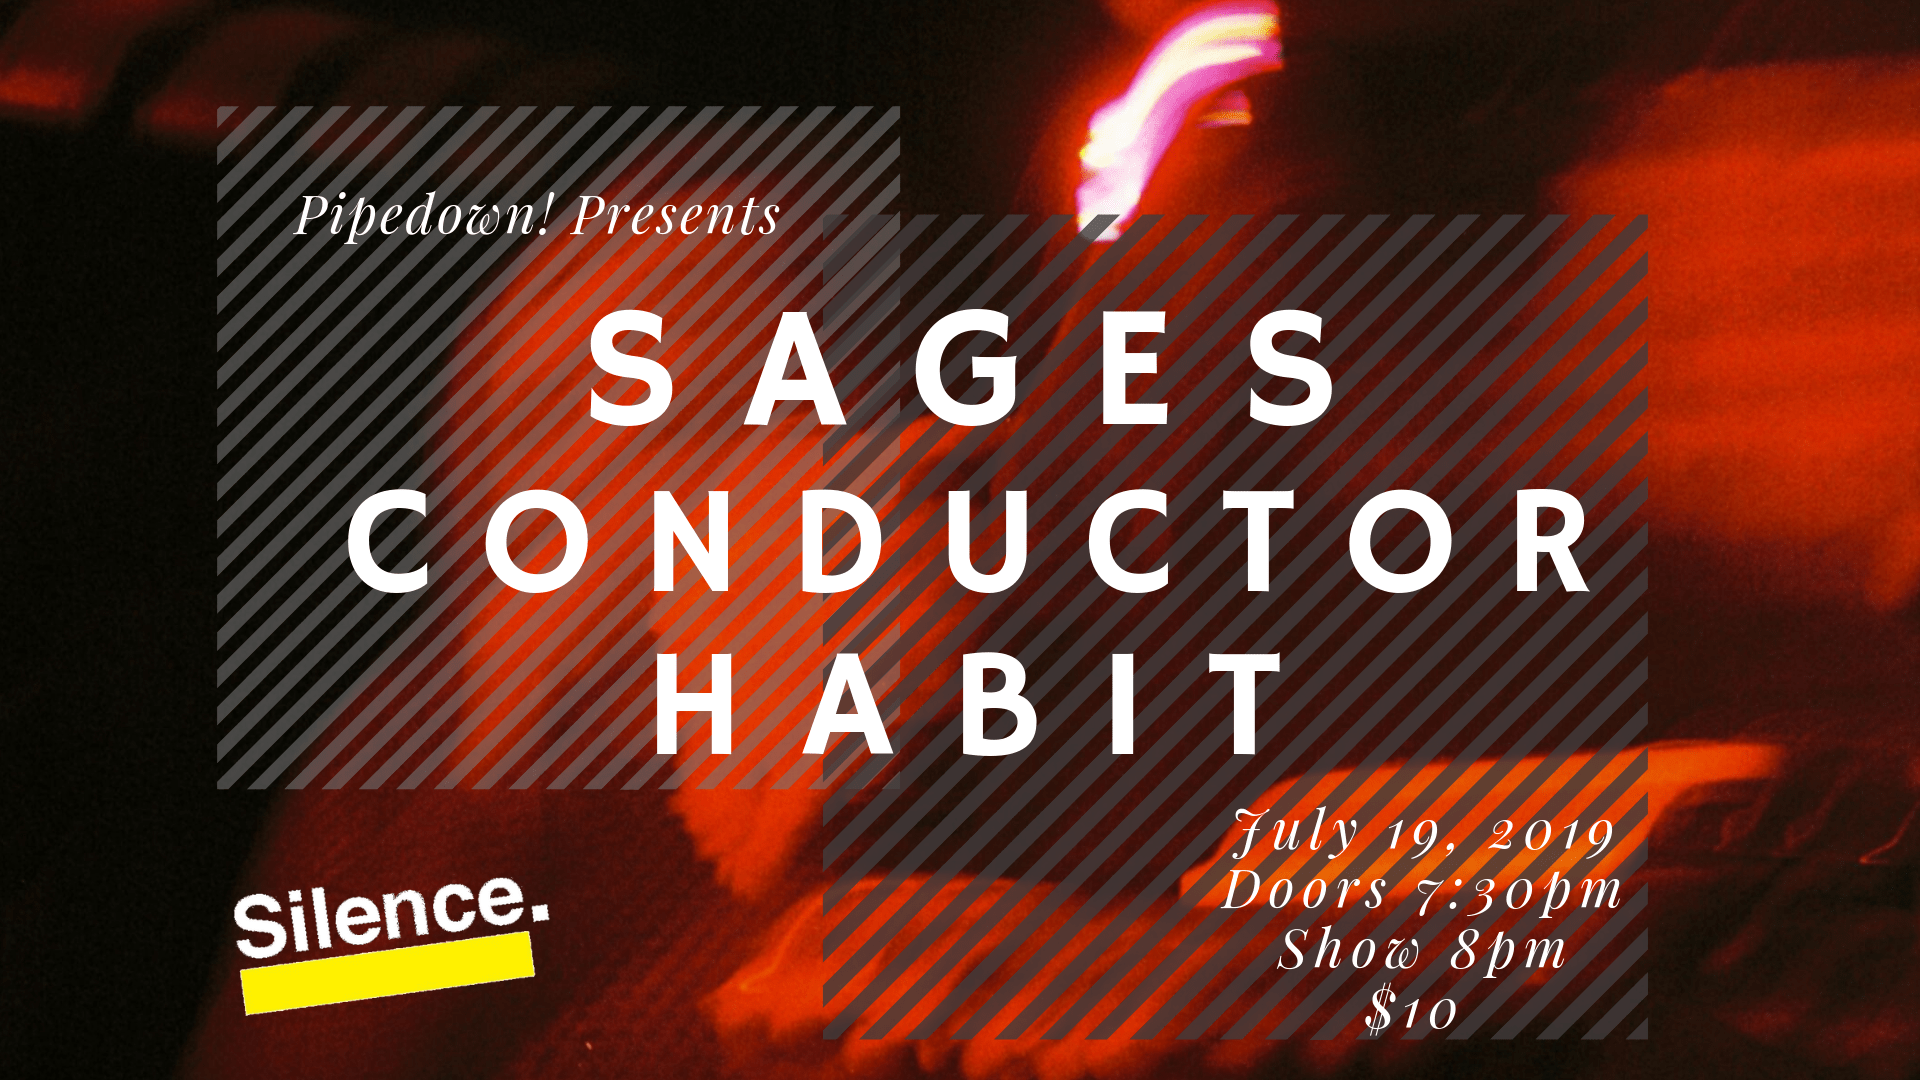 FB Cover Pipedown Sages_Conductor_Habit